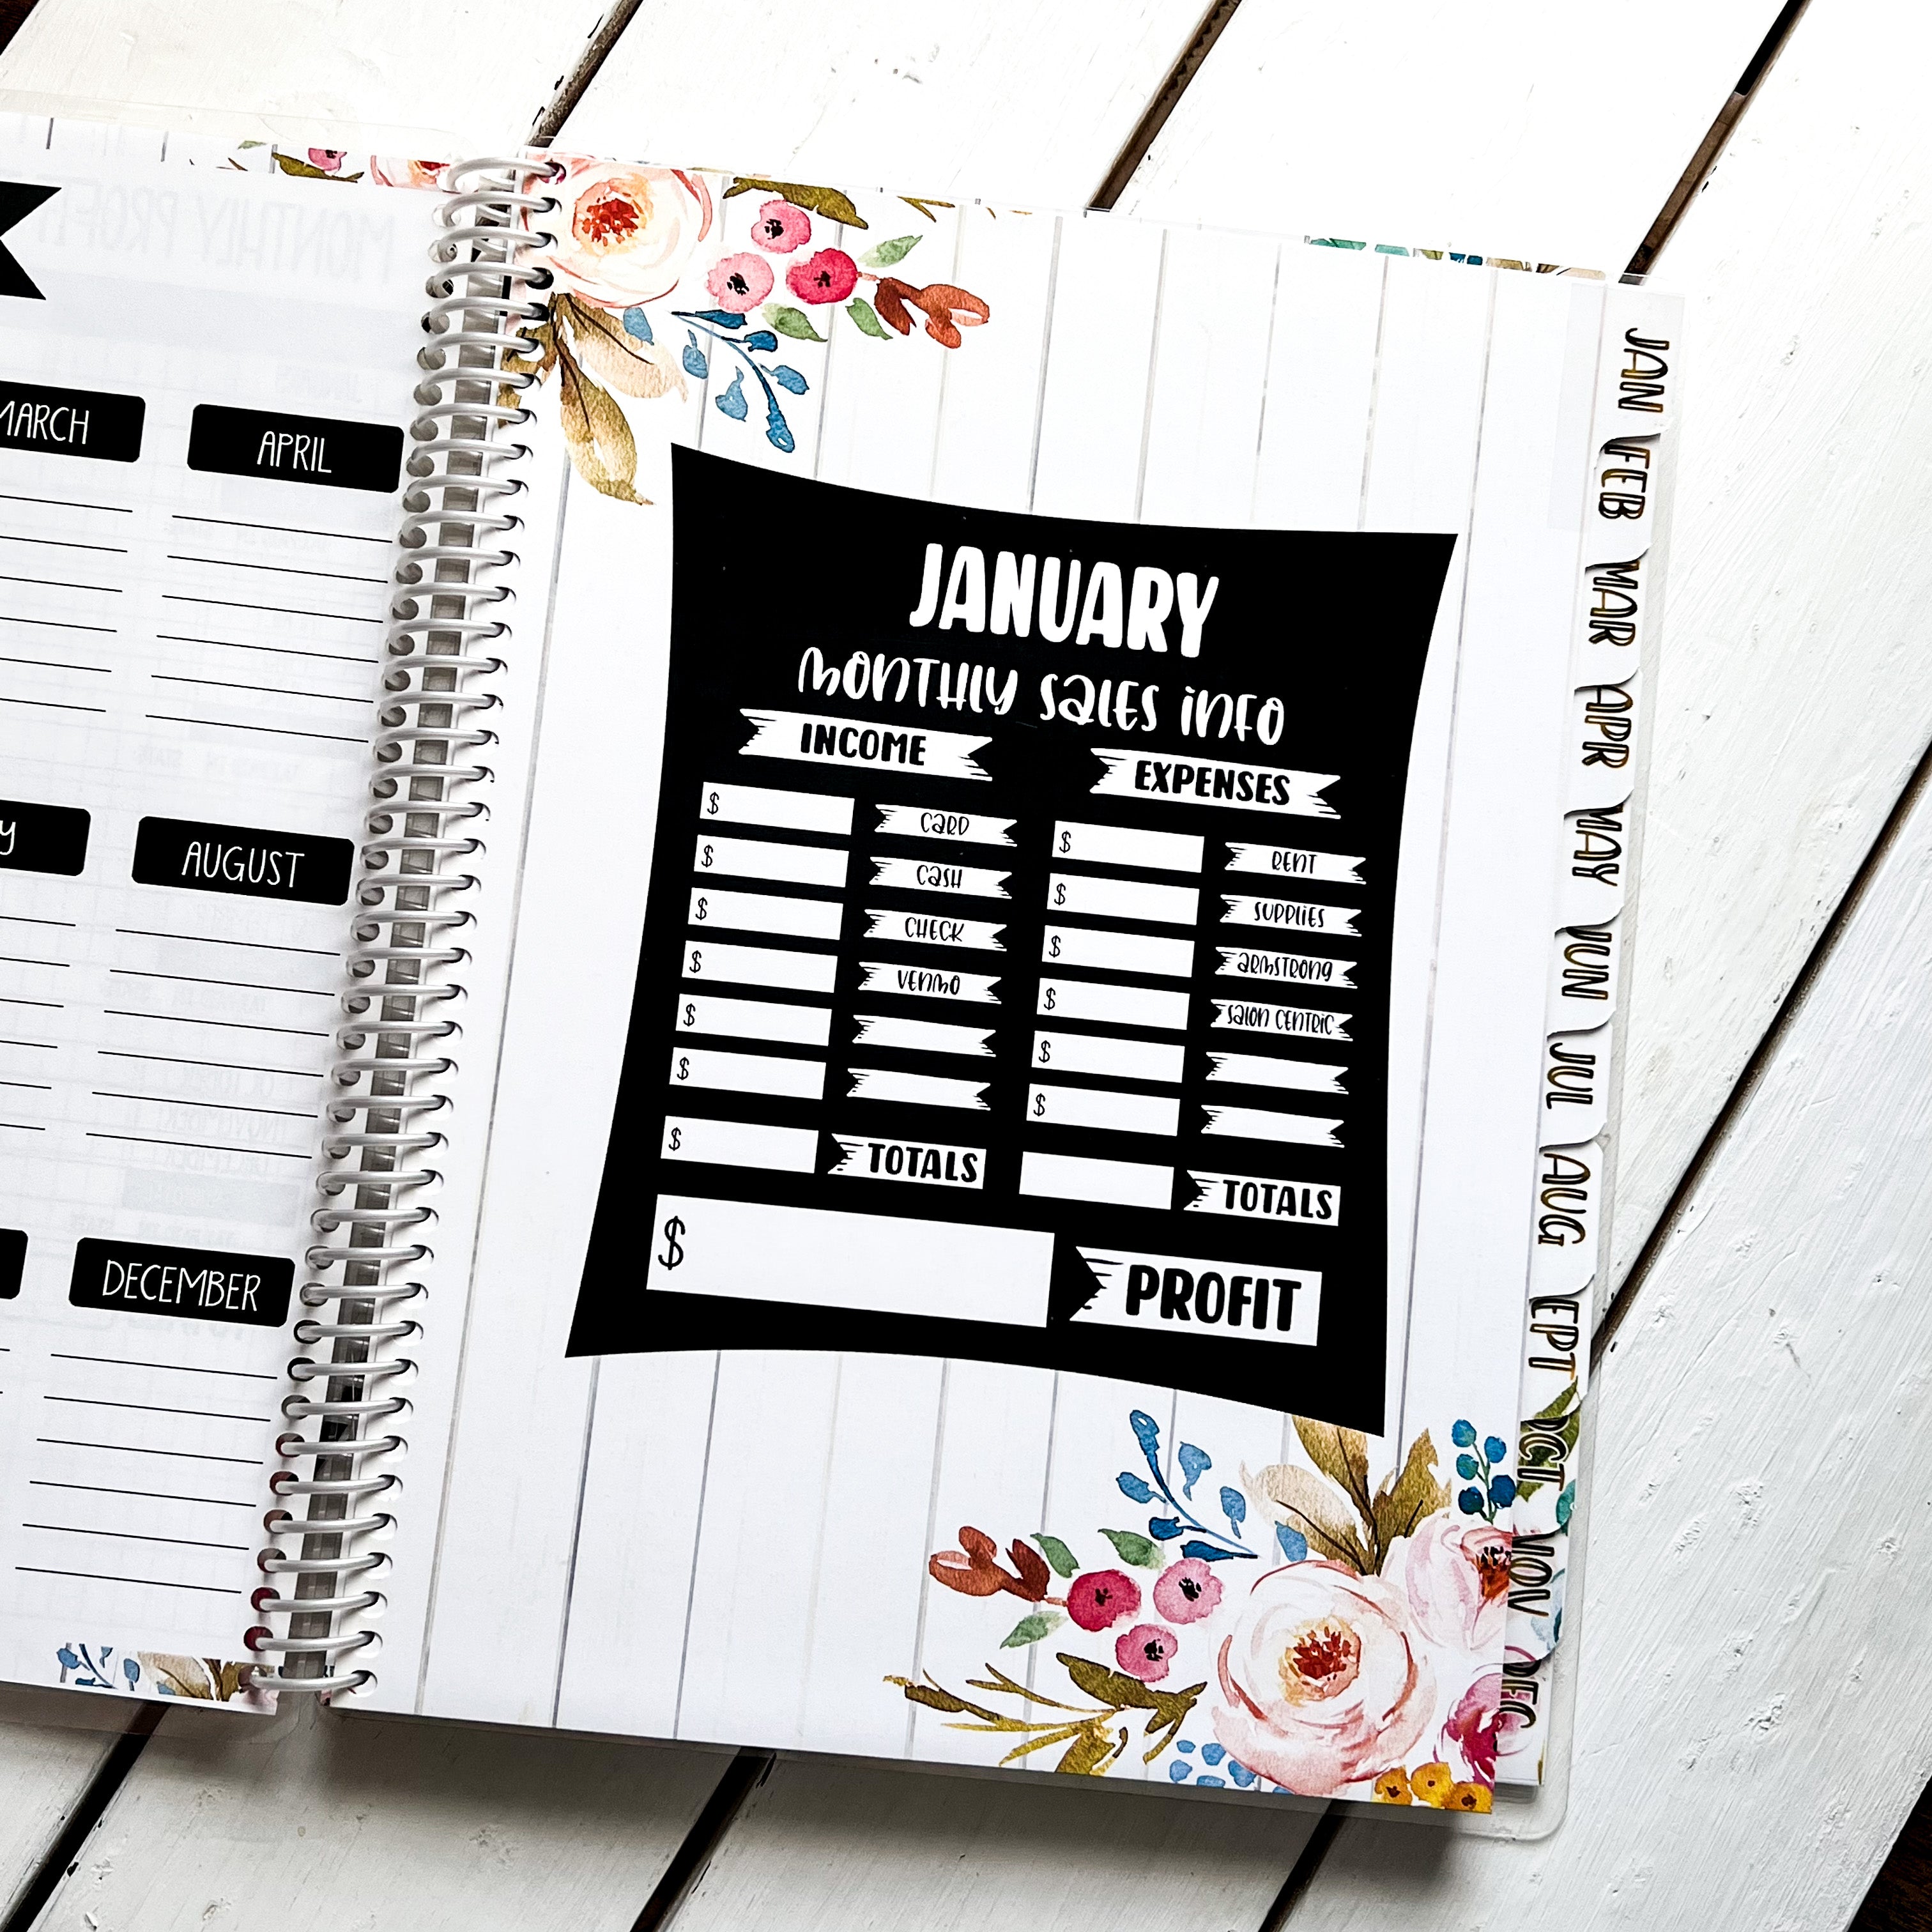 Sales Tracker Appointment Book - DIGITAL CAMO